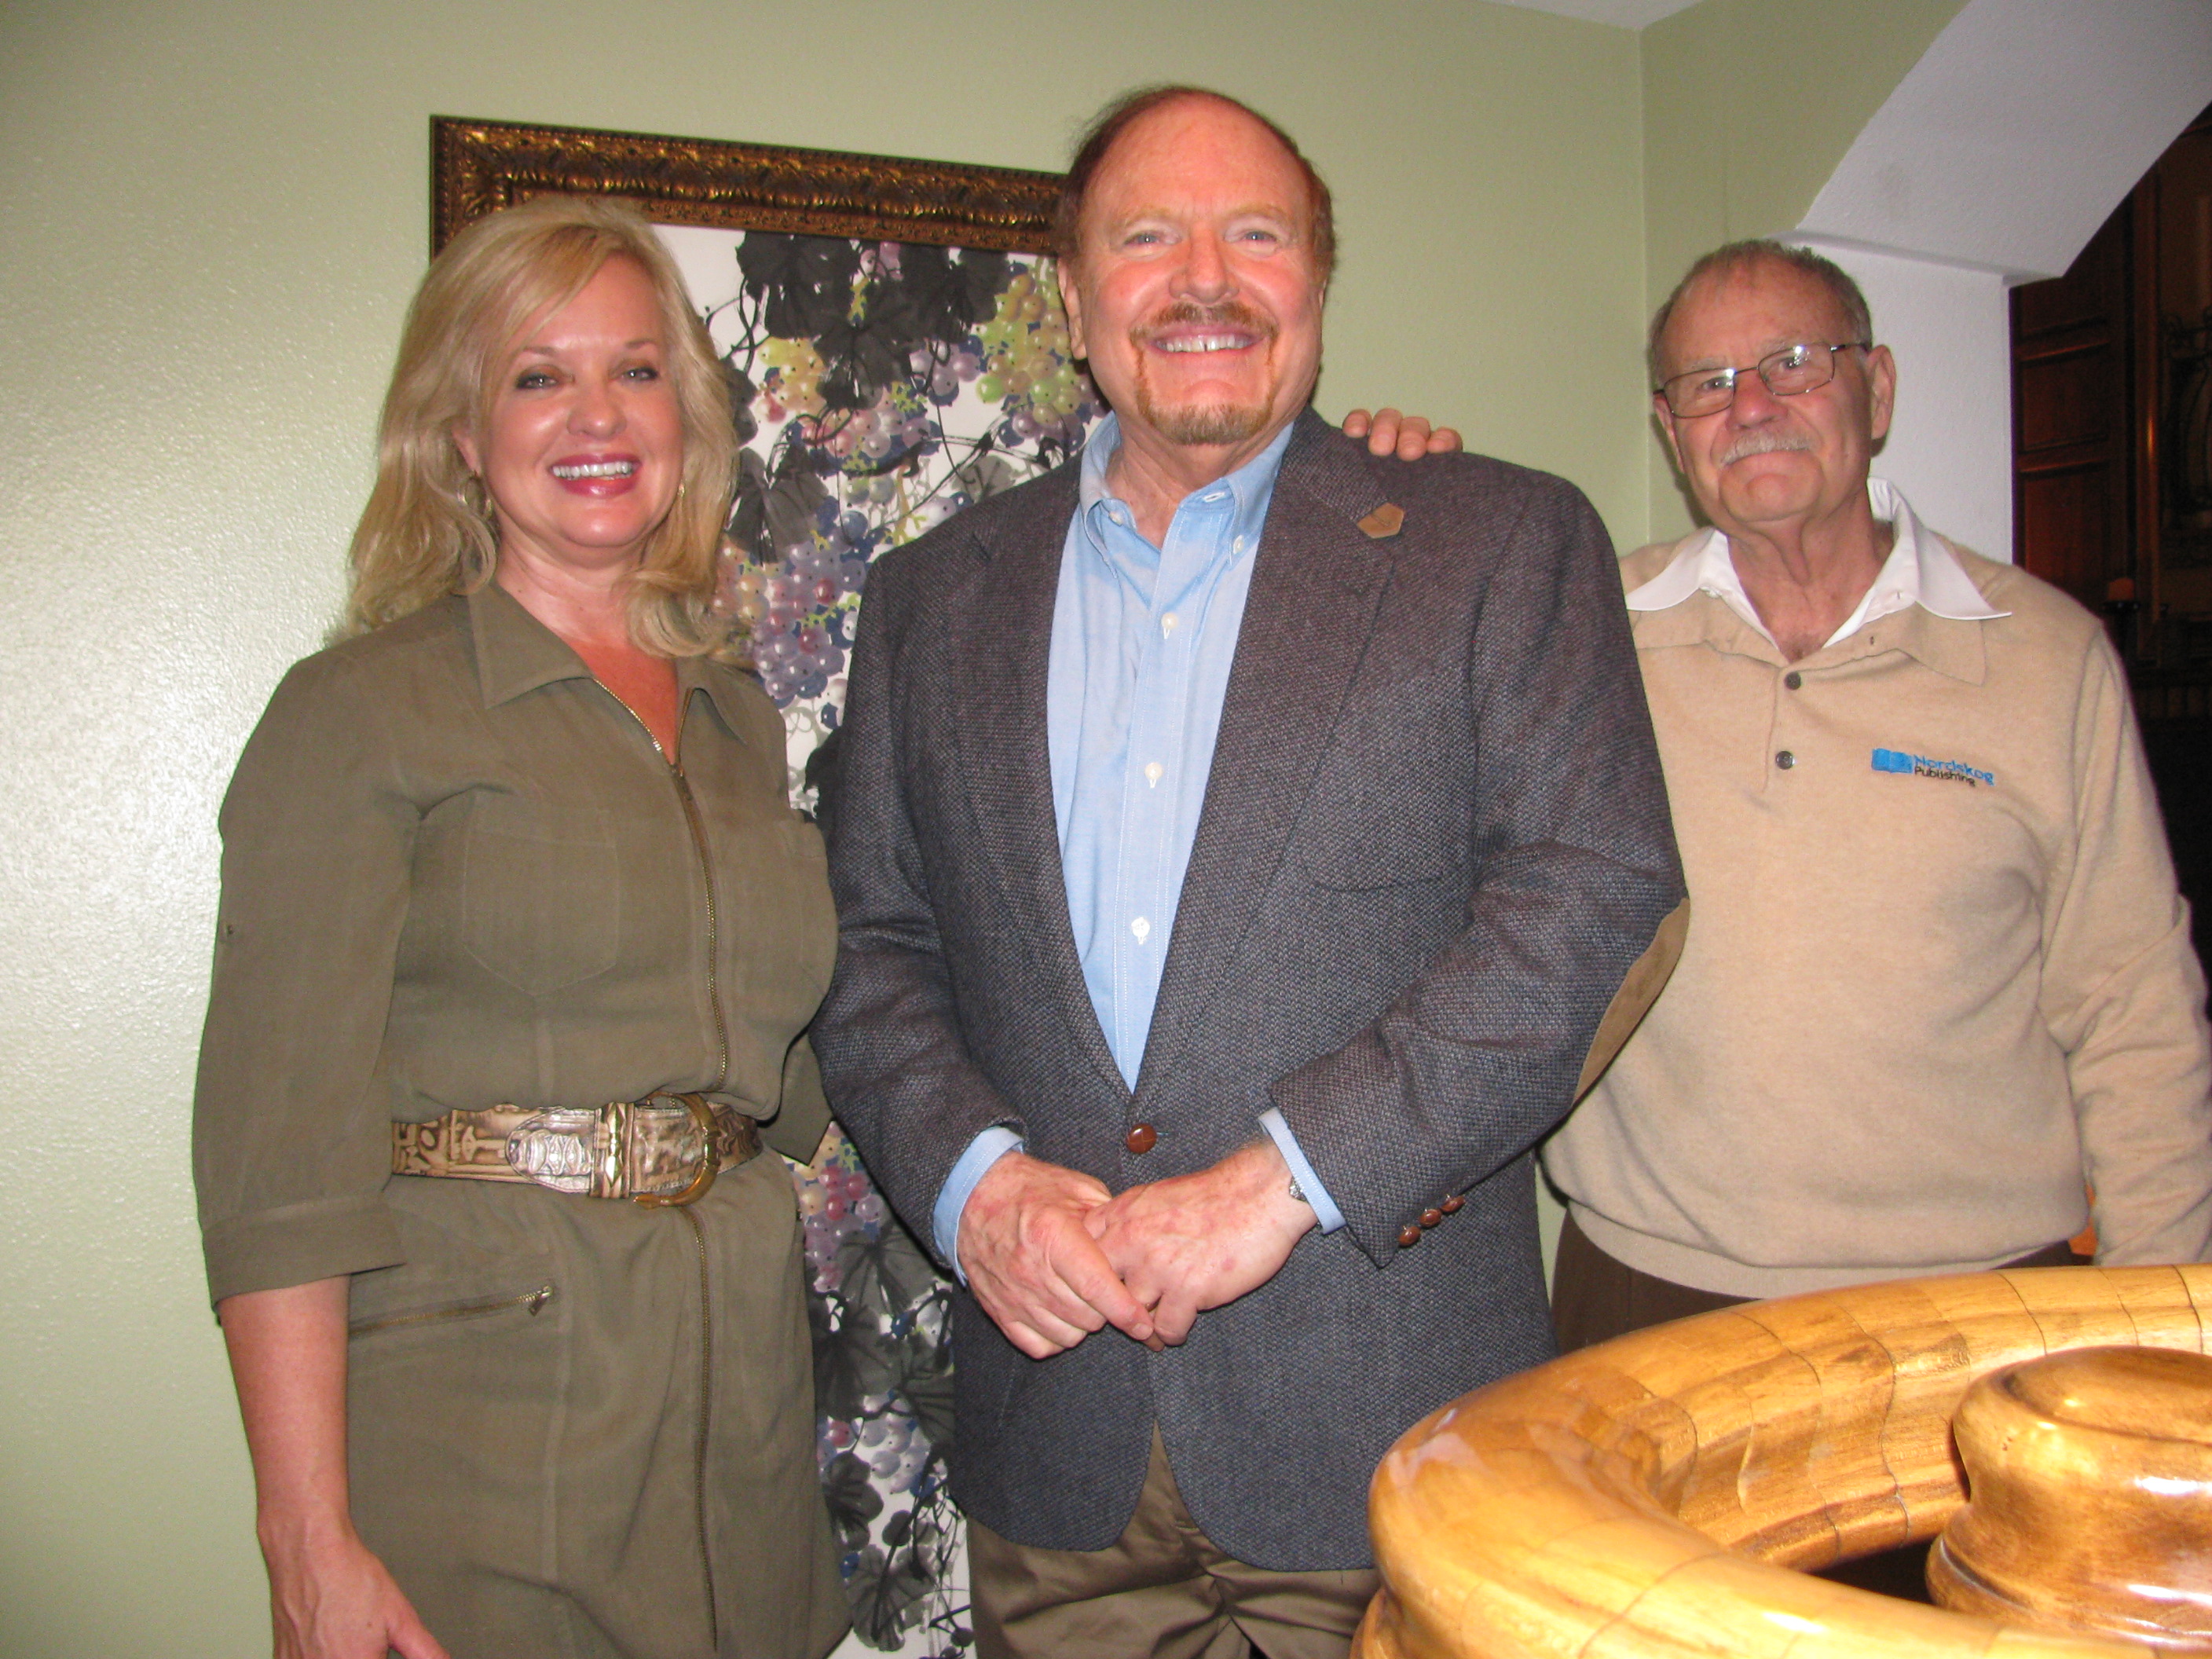 Jerry & Gail with Dr. Marshall Foster